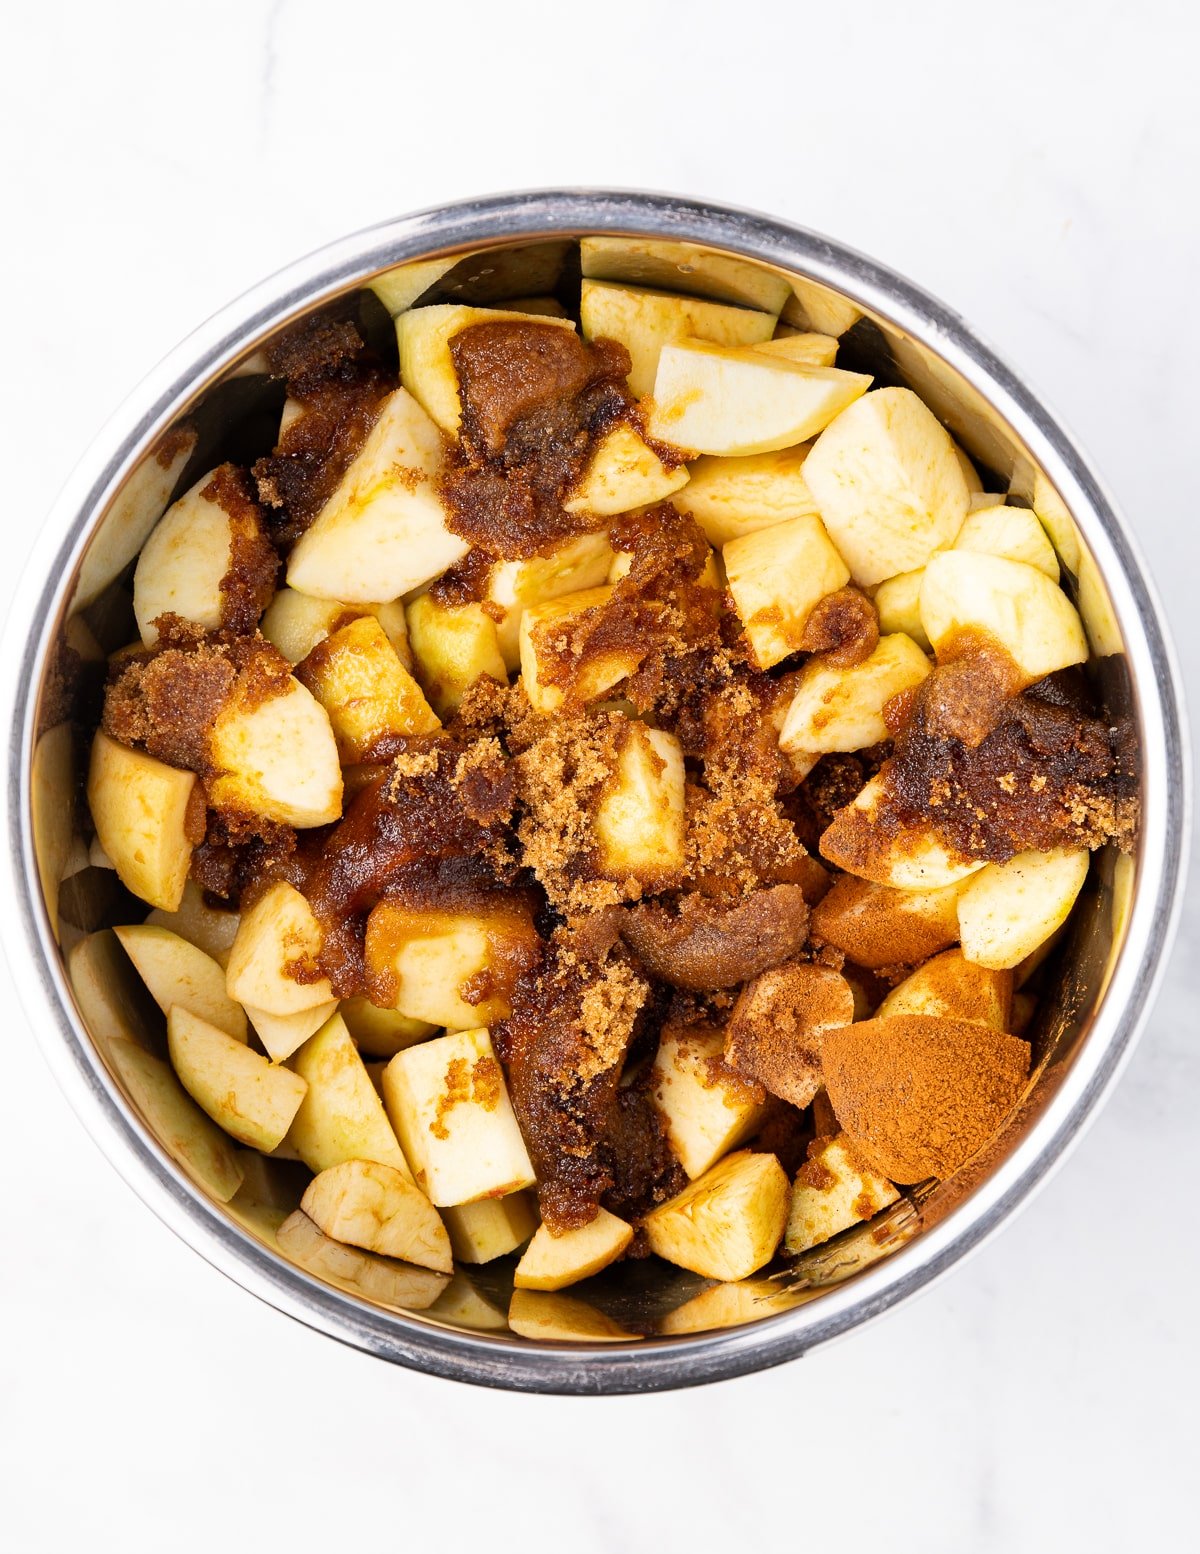 uncooked apples, sugar, and spices in an Instant Pot